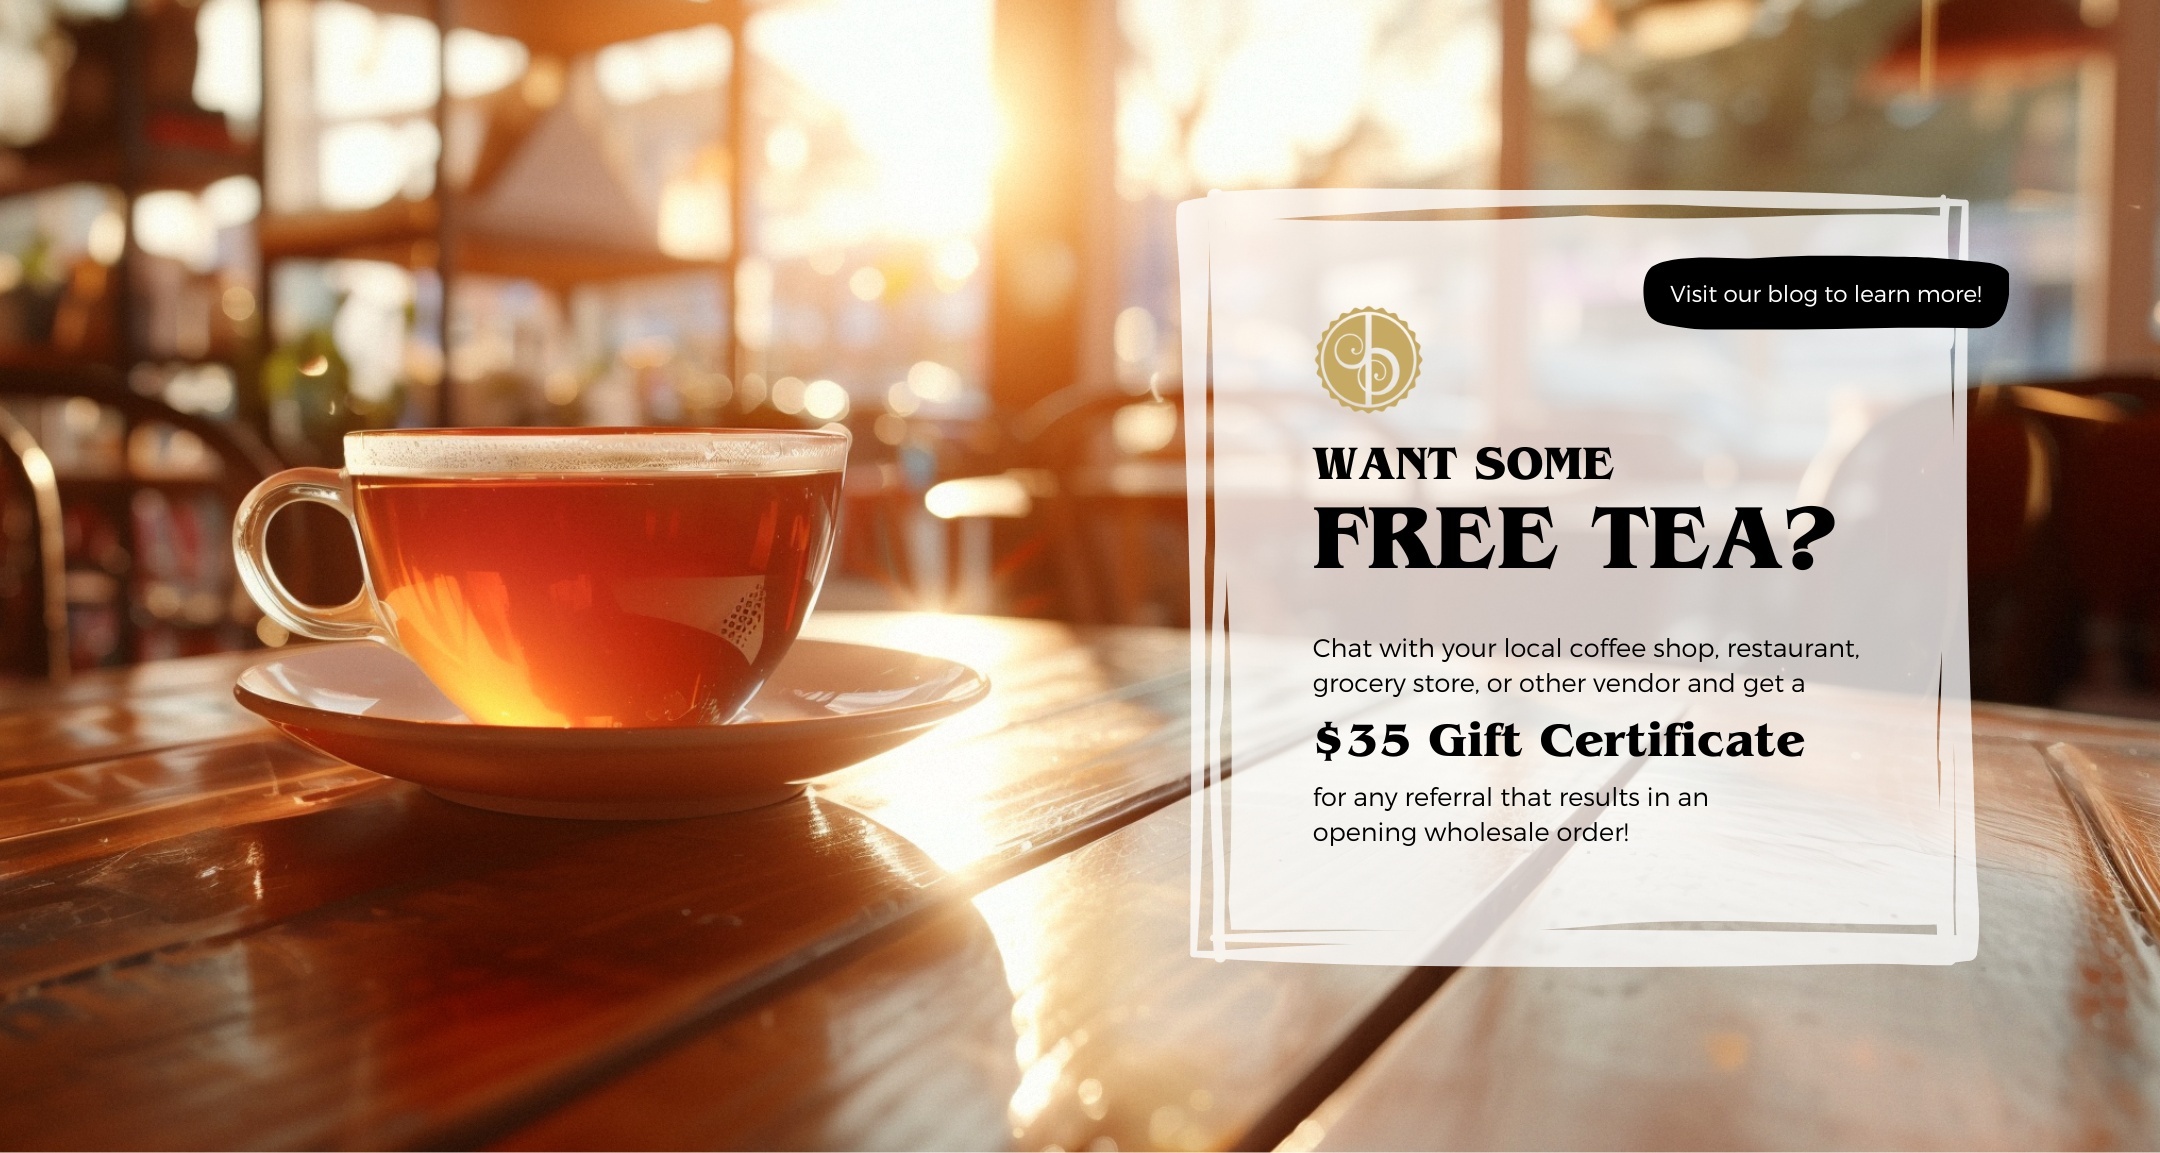 Get $FREE TEA$ for Wholesale Referrals